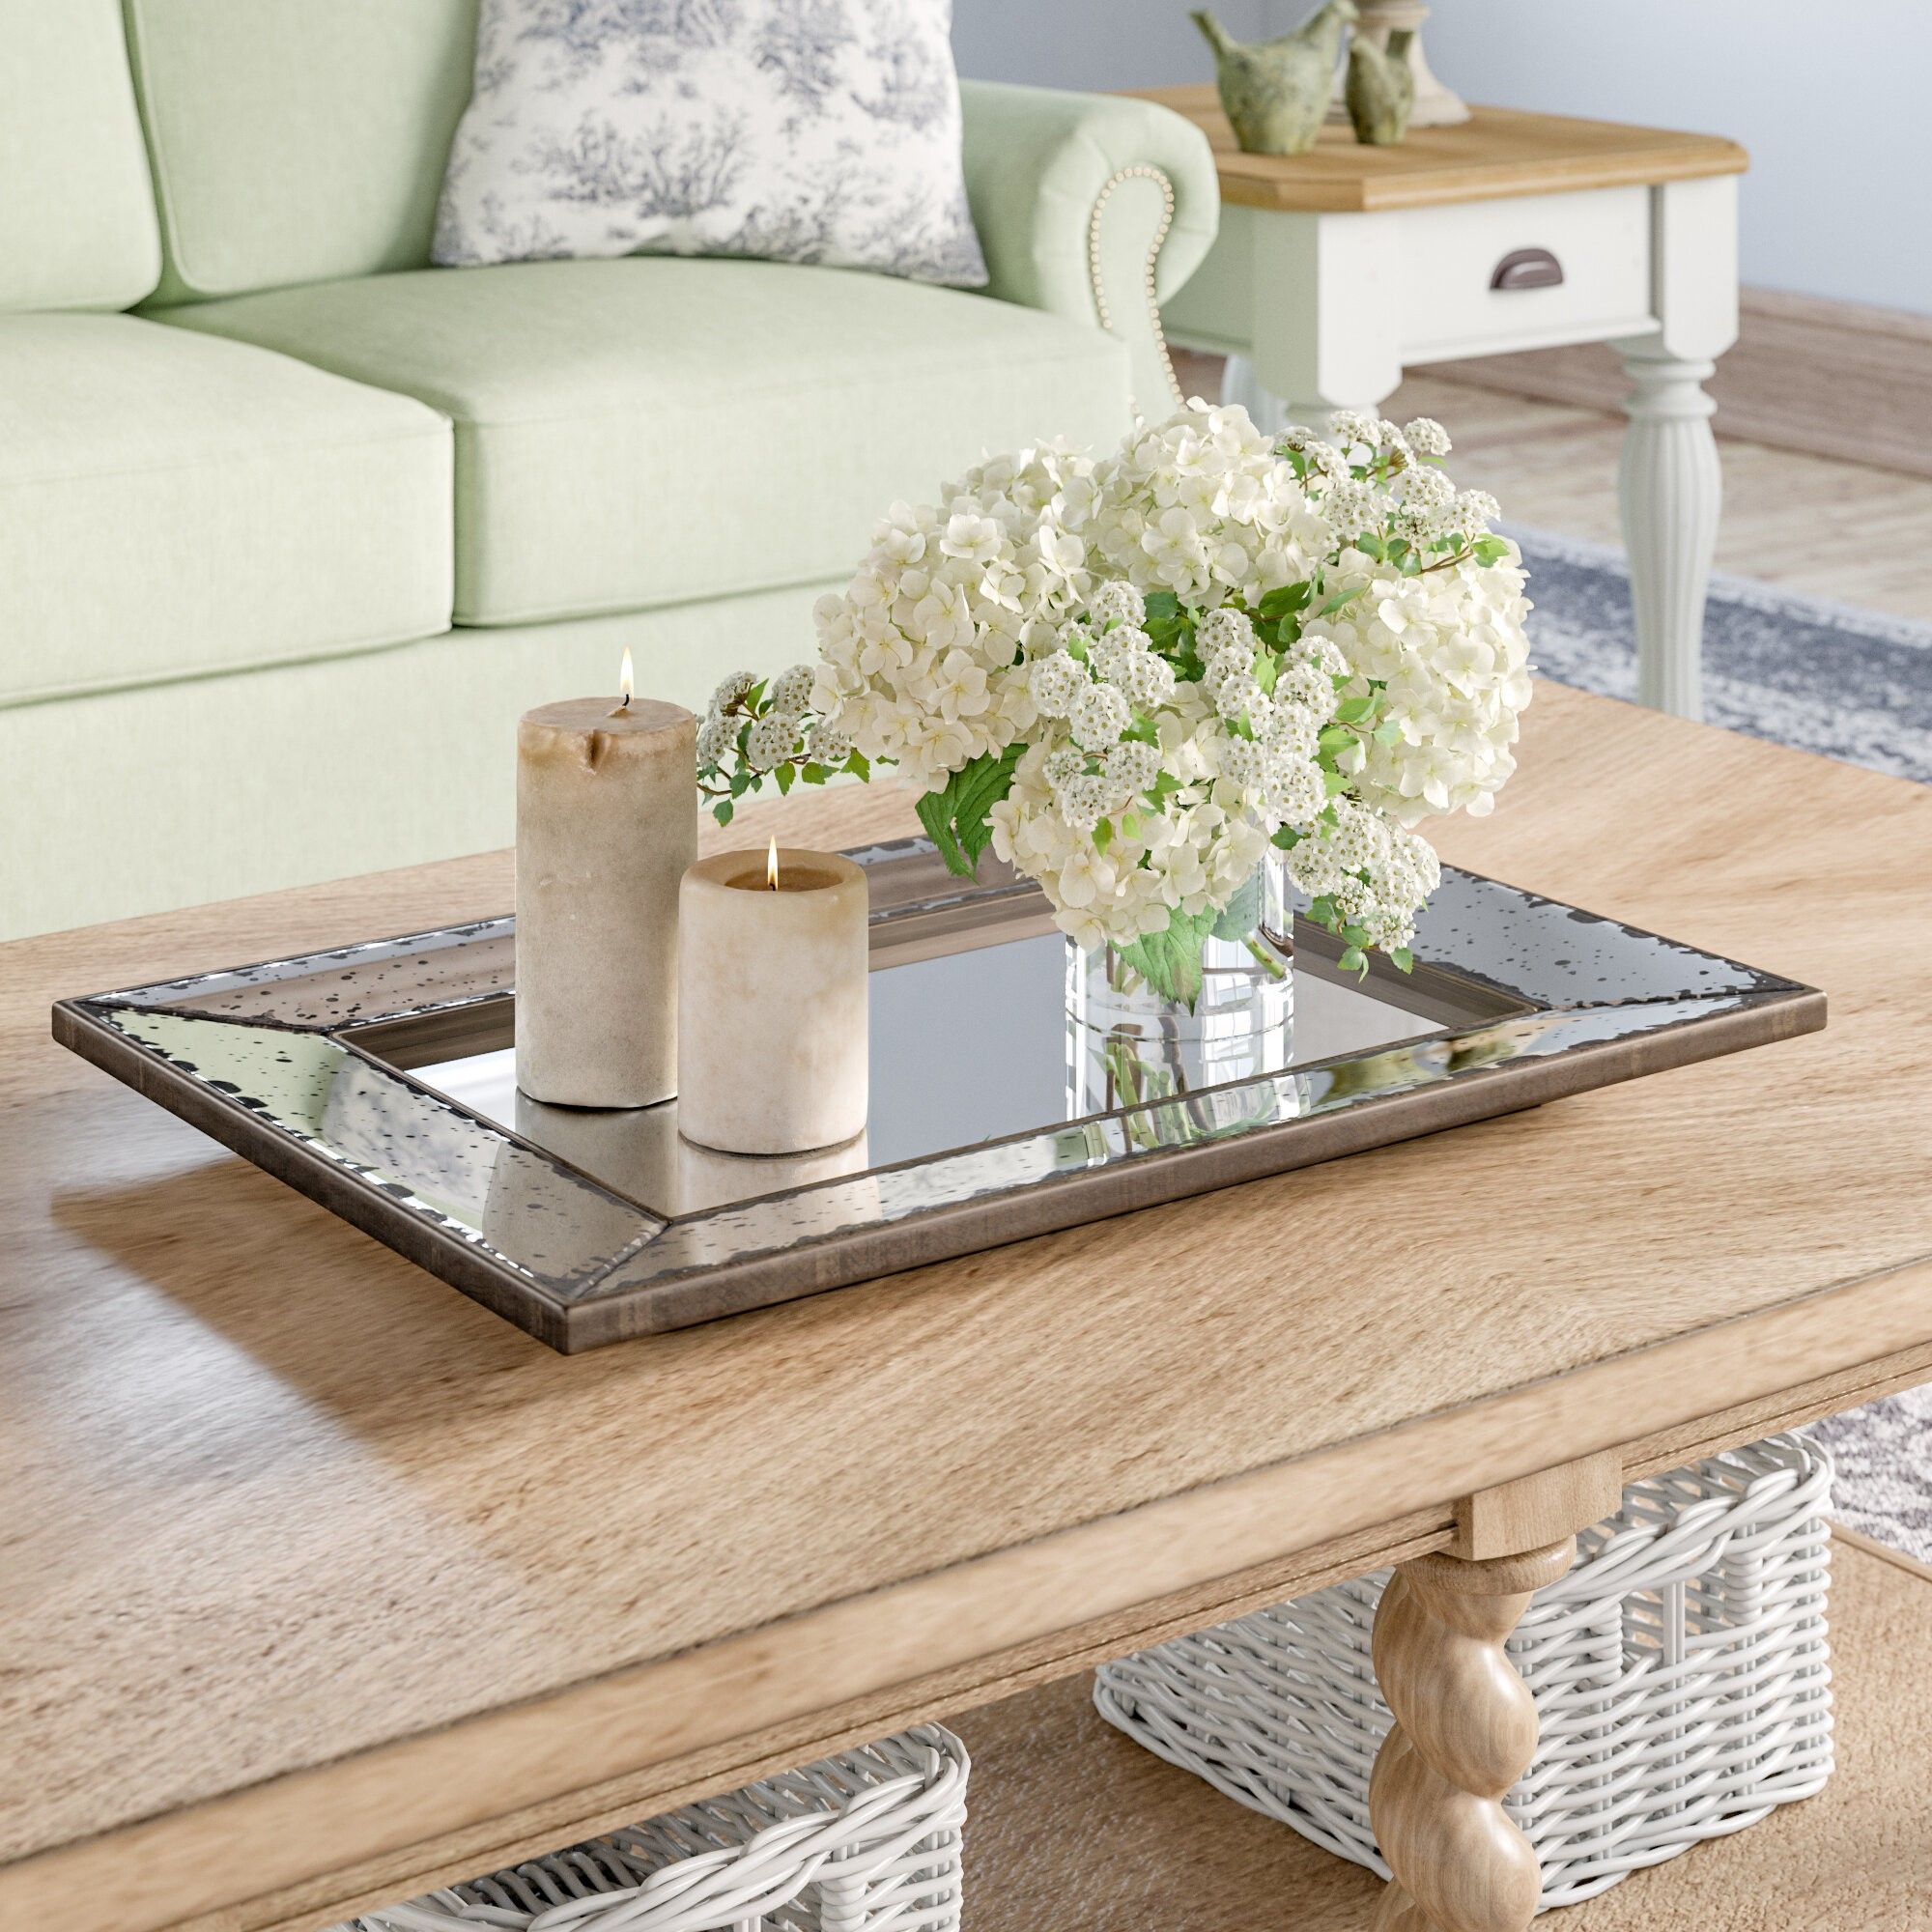 10 Best Decorative Trays For 2021 – Ideas On Foter With Regard To Coffee Tables With Trays (View 18 of 20)